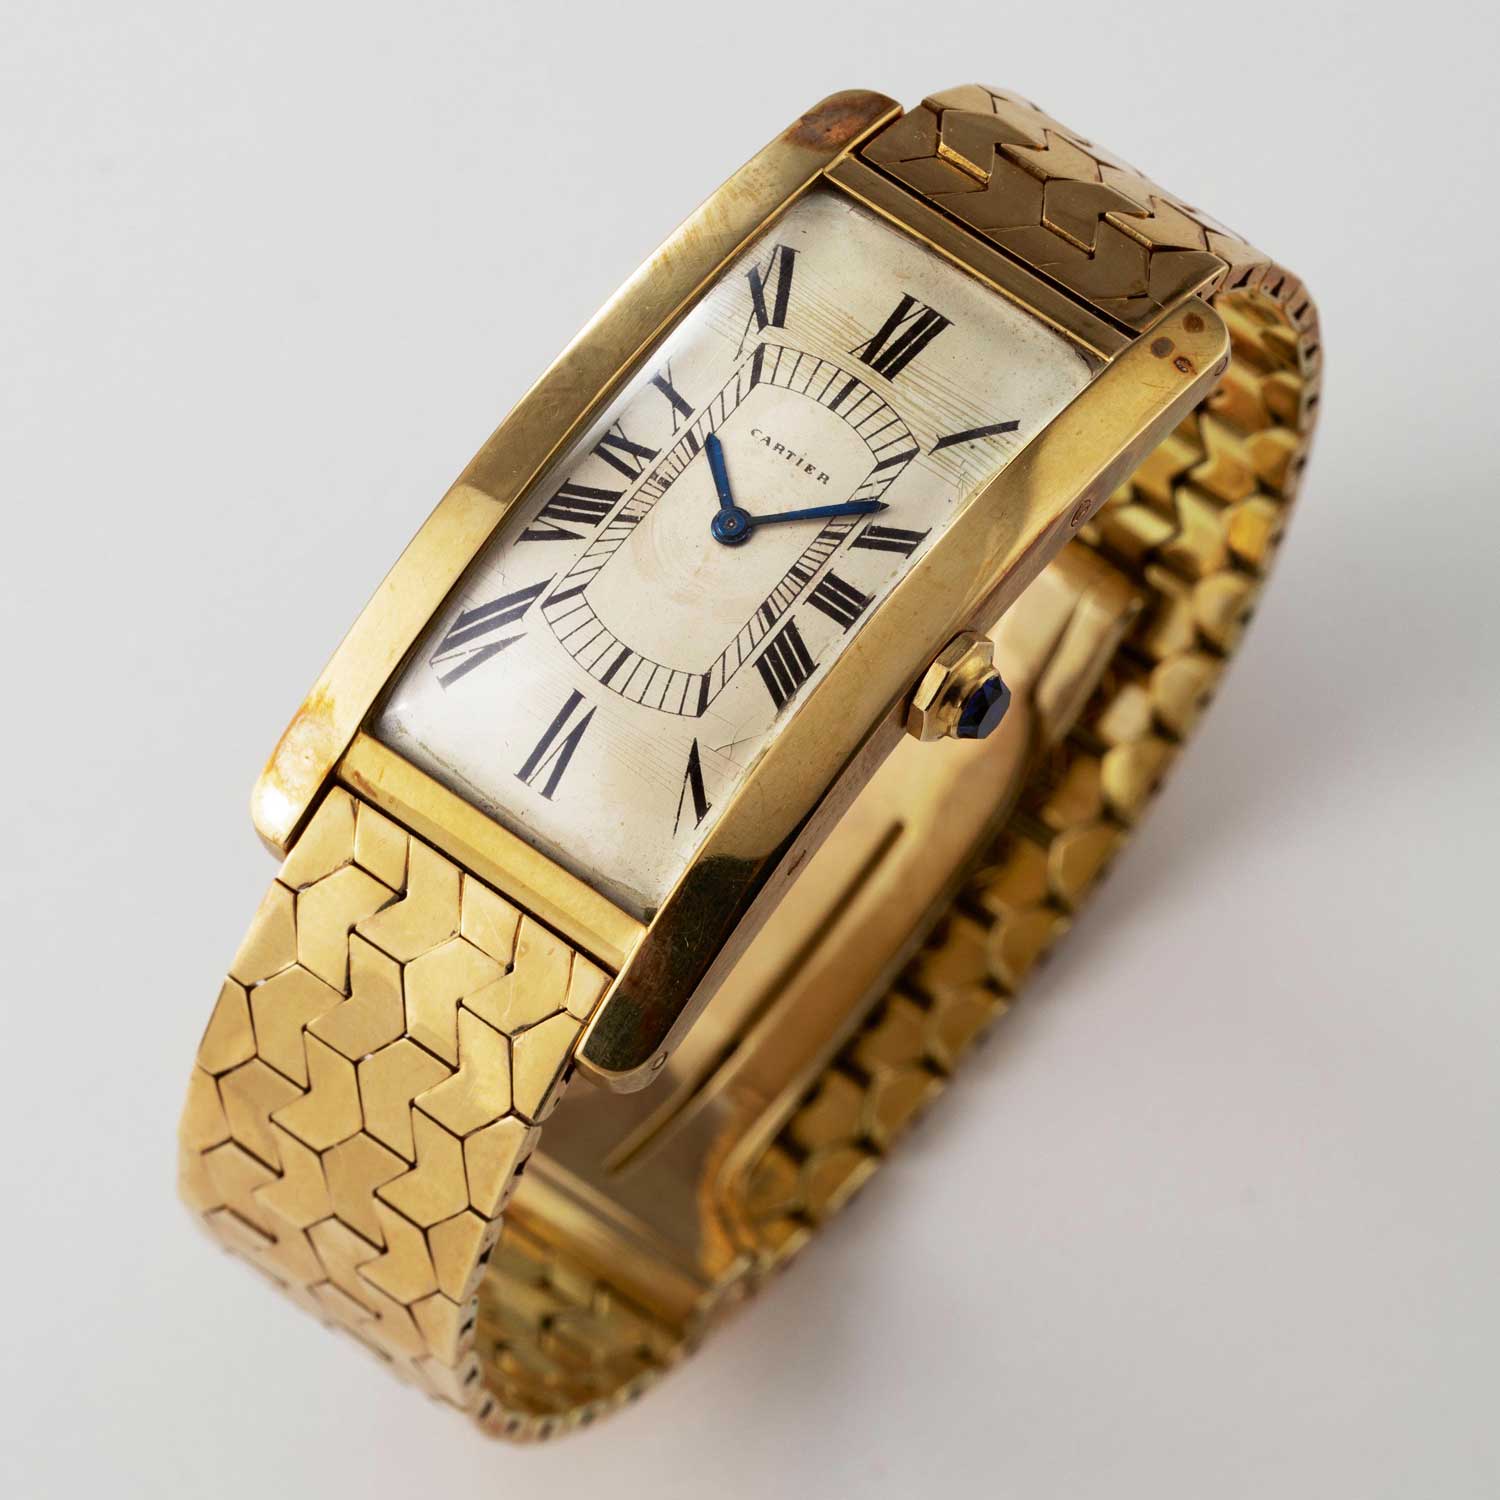 Yellow gold Tank Cintrée from the 1950s marks a significant Cartier design evolution with the octagonal flat crown and cabochon, from the old pointed crown (Image © Revolution)